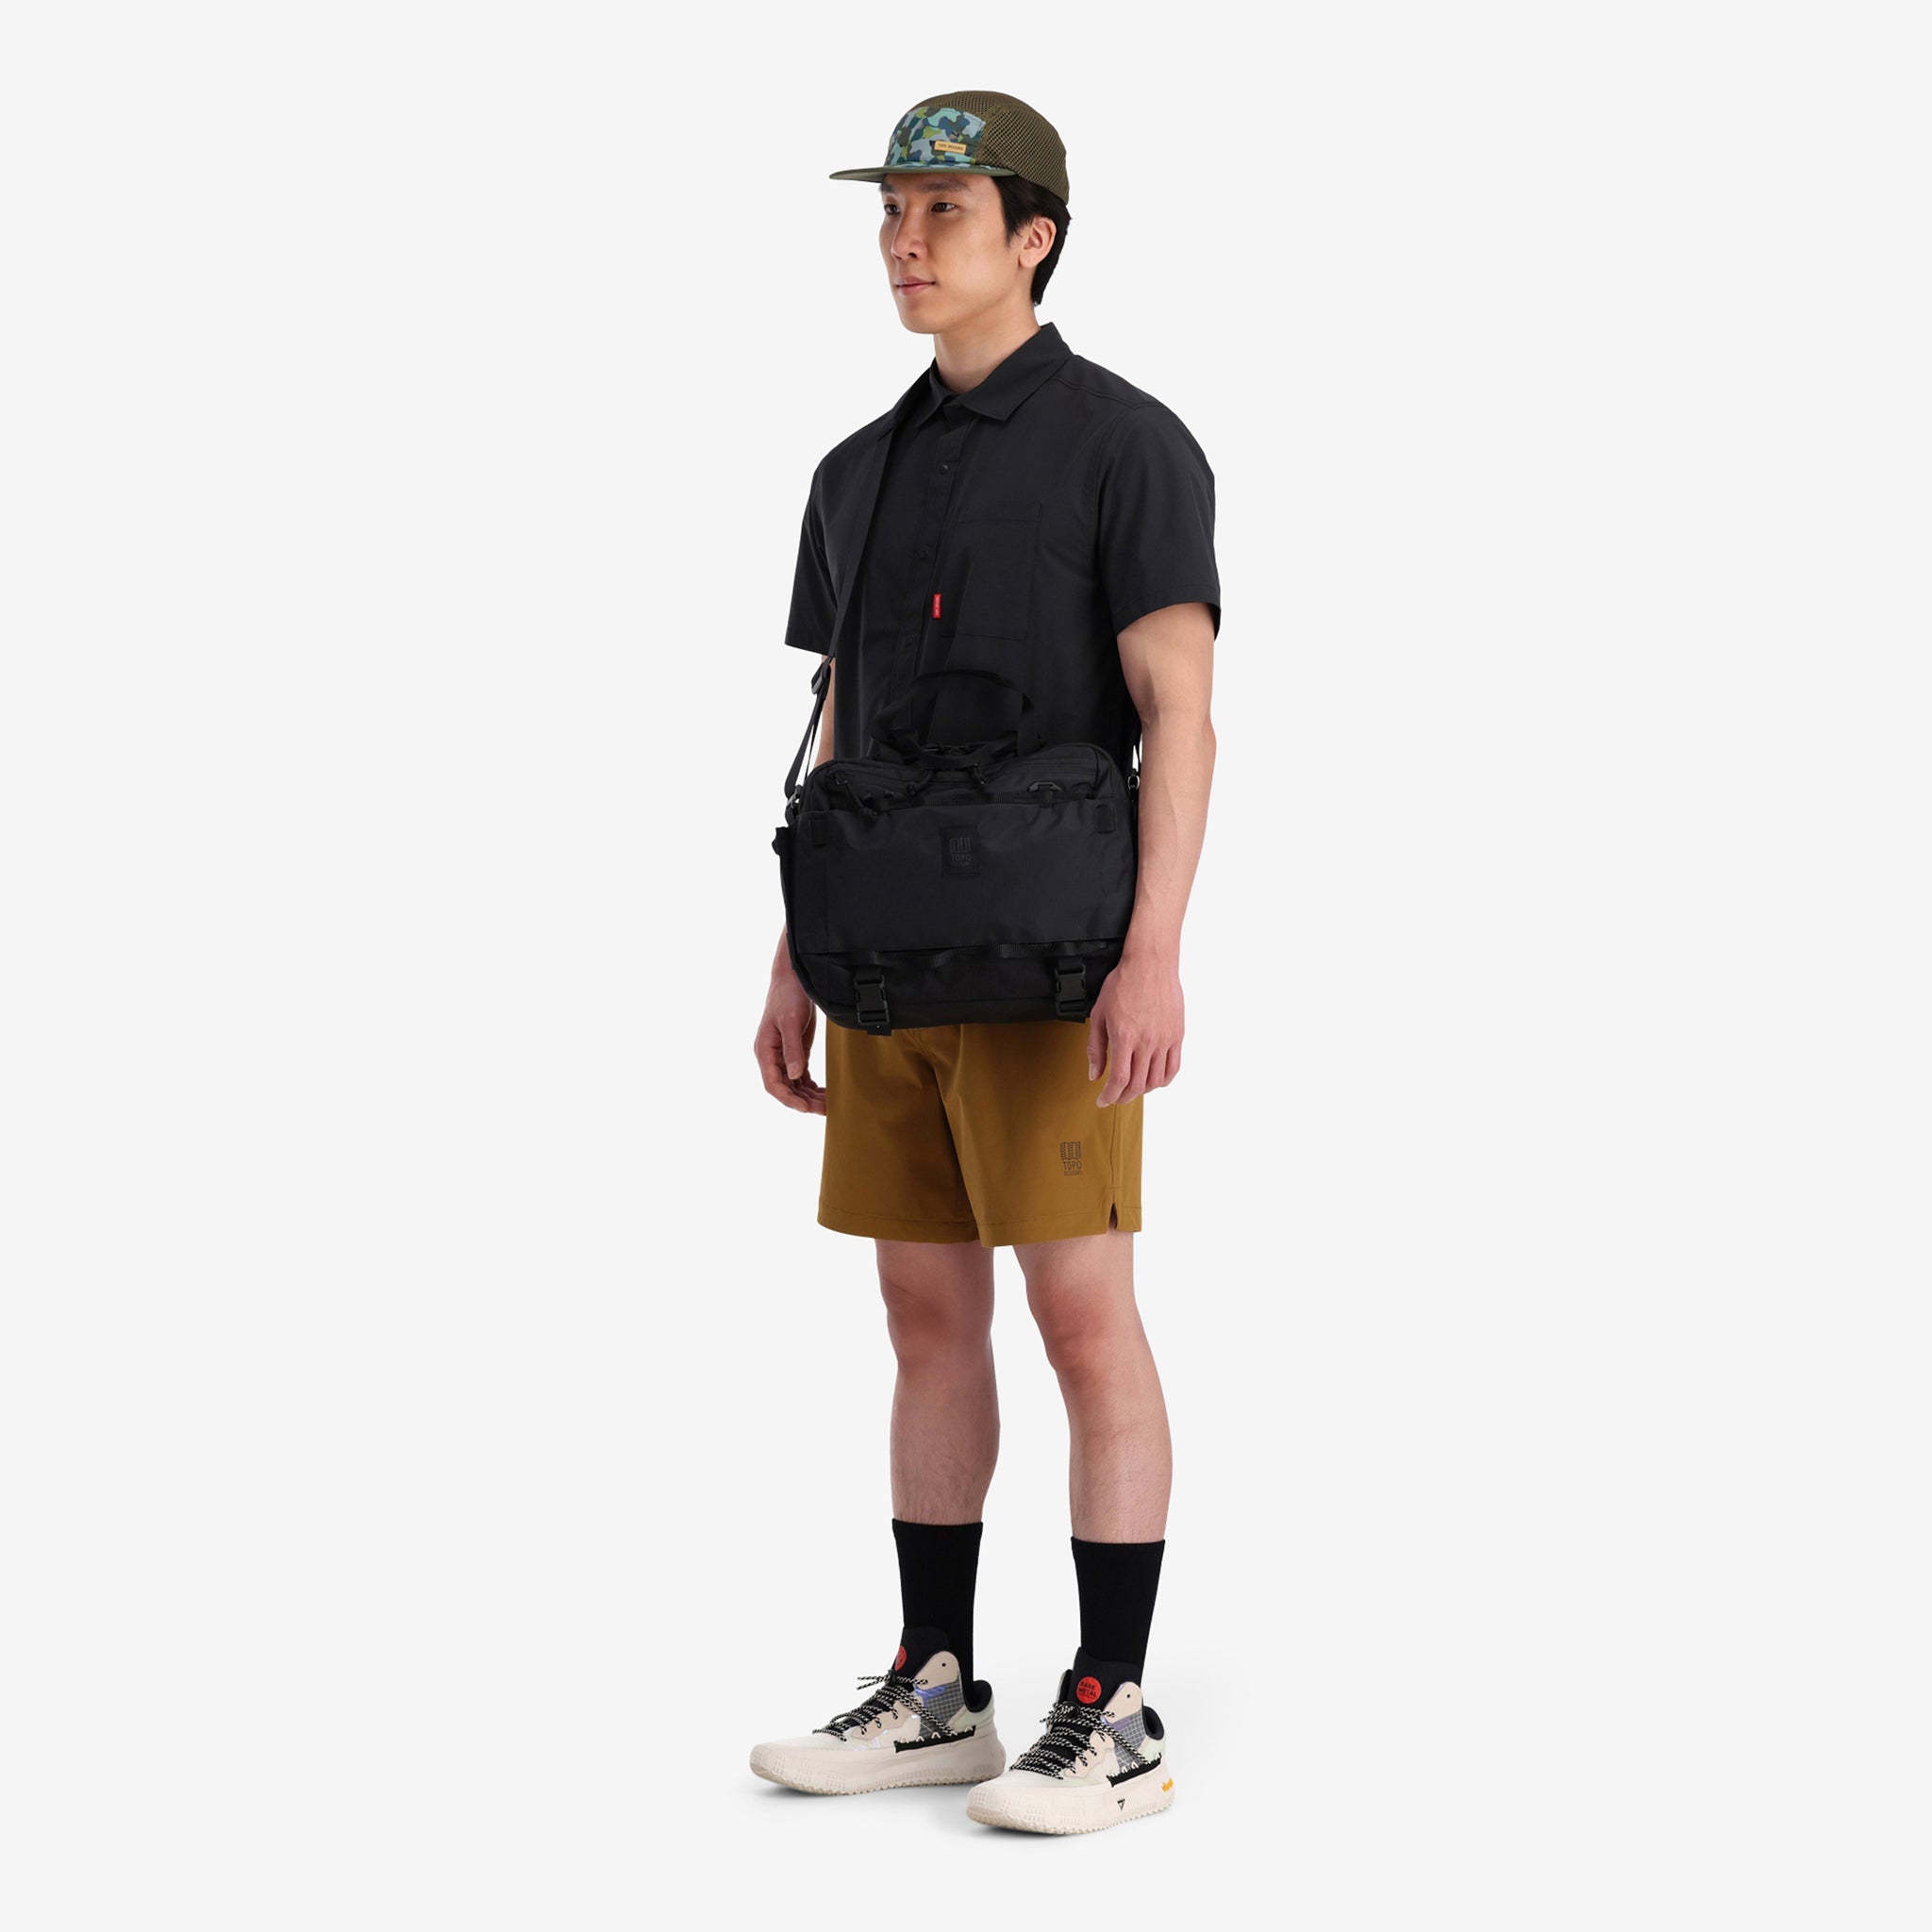 General shot of crossbody view of model with the Topo Designs Mountain Cross Bag in recycled "Black" nylon.